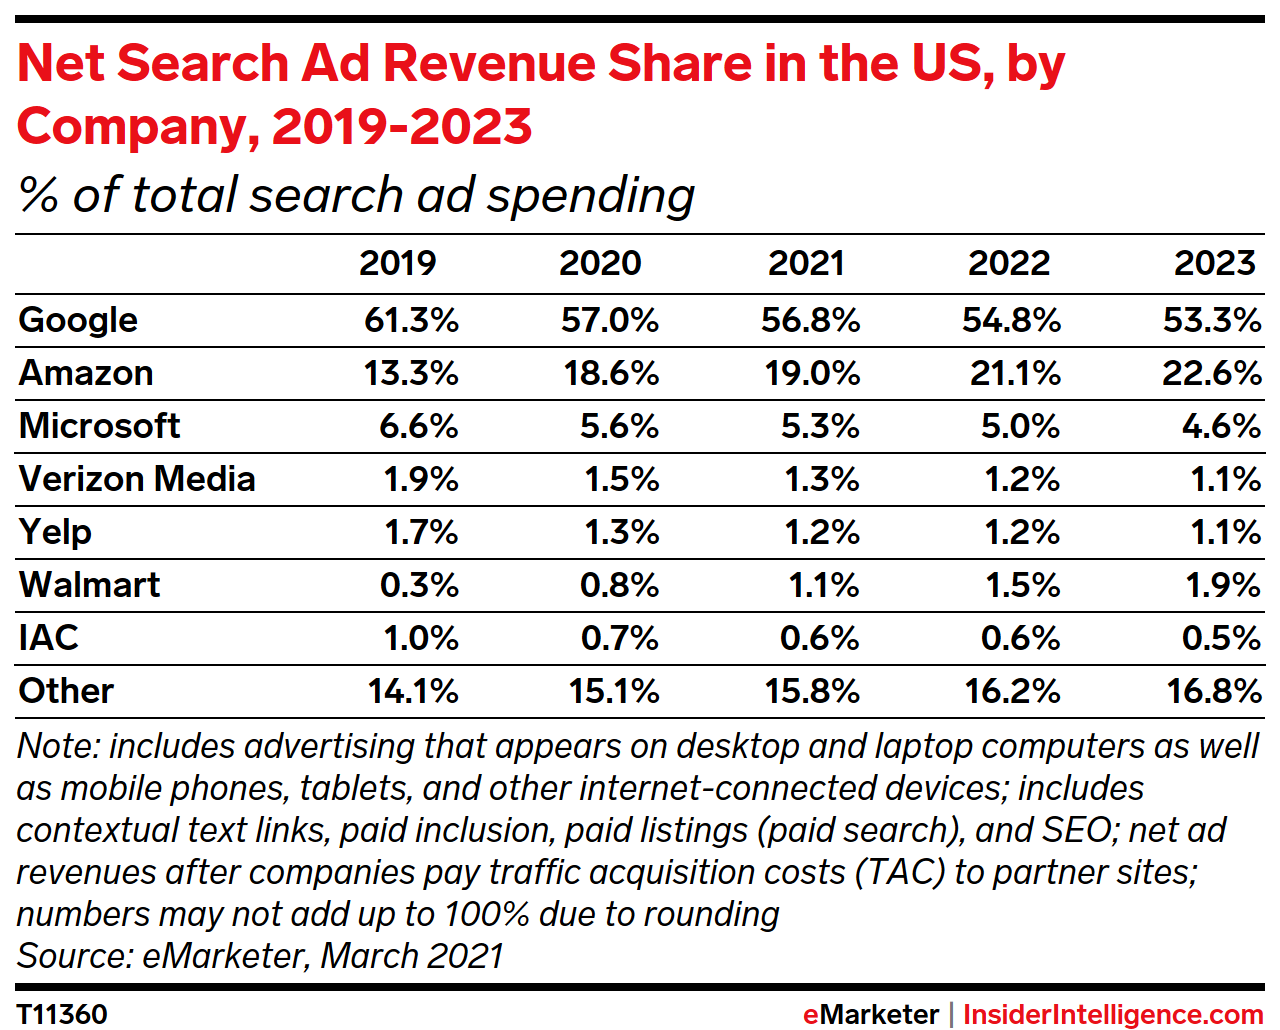 Net Search Ad Revenue Share in the US, by Company, 2019-2023 (% of total)